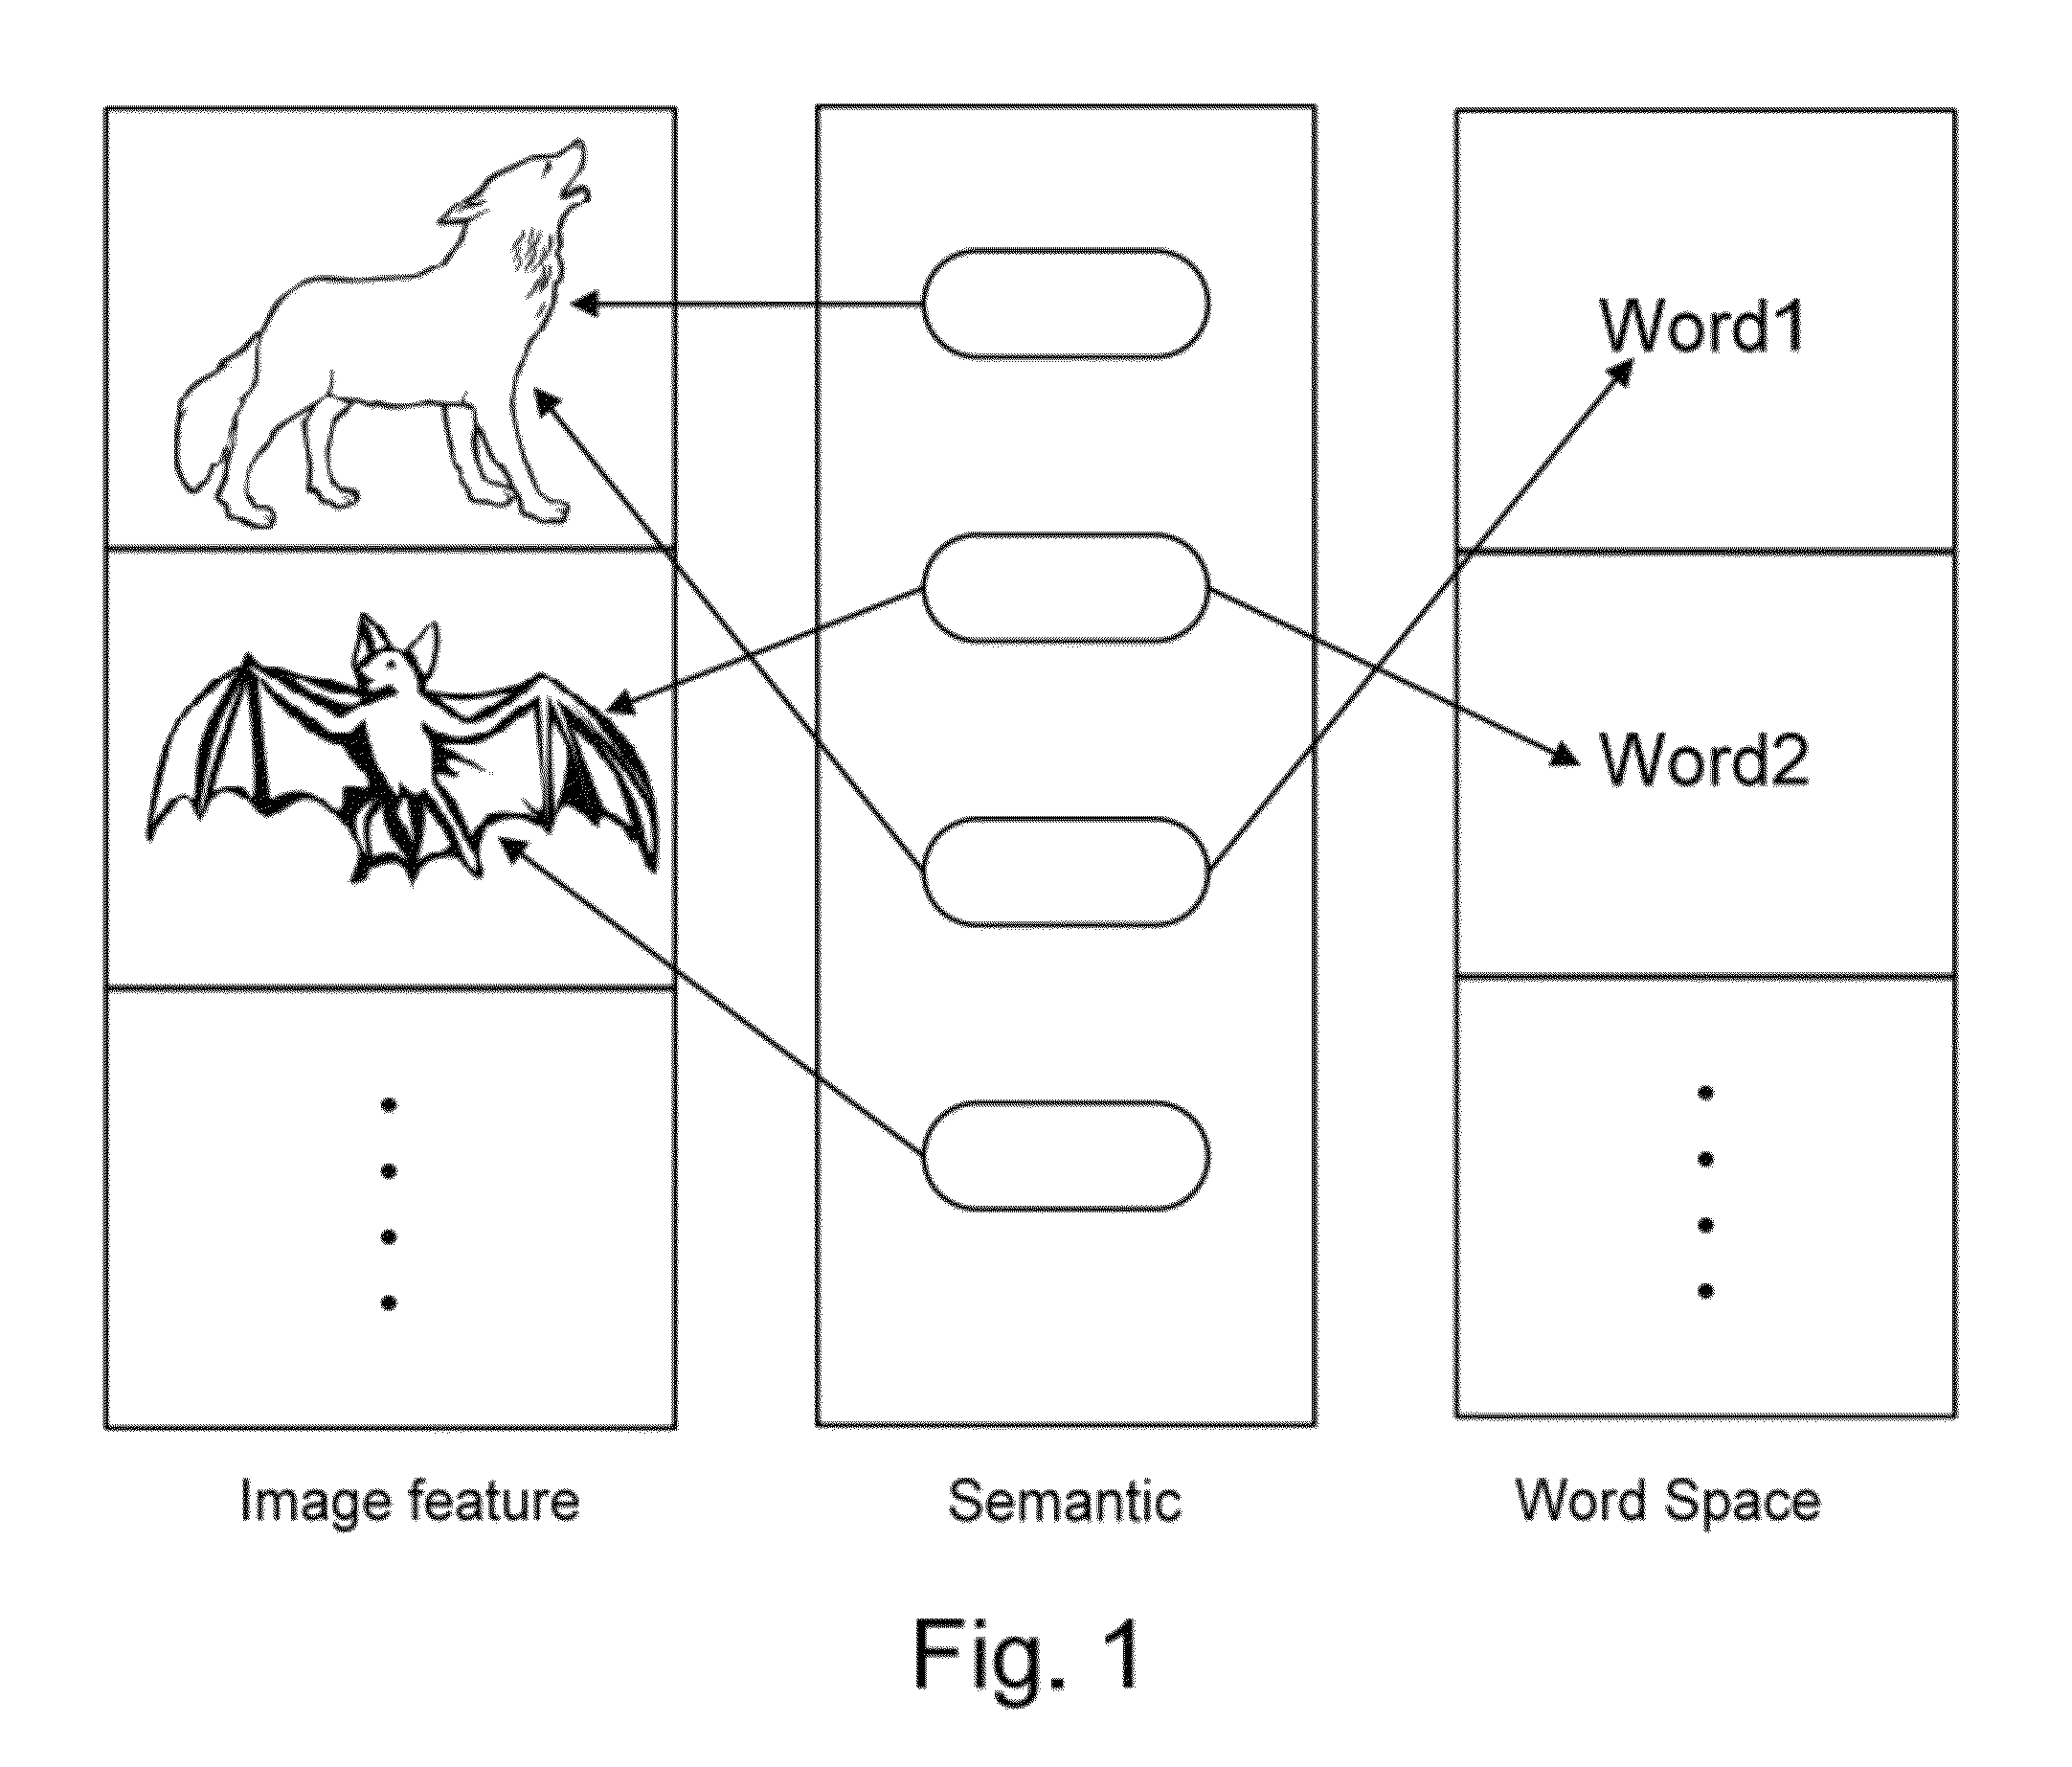 System and method for image annotation and multi-modal image retrieval using probabilistic semantic models comprising at least one joint probability distribution